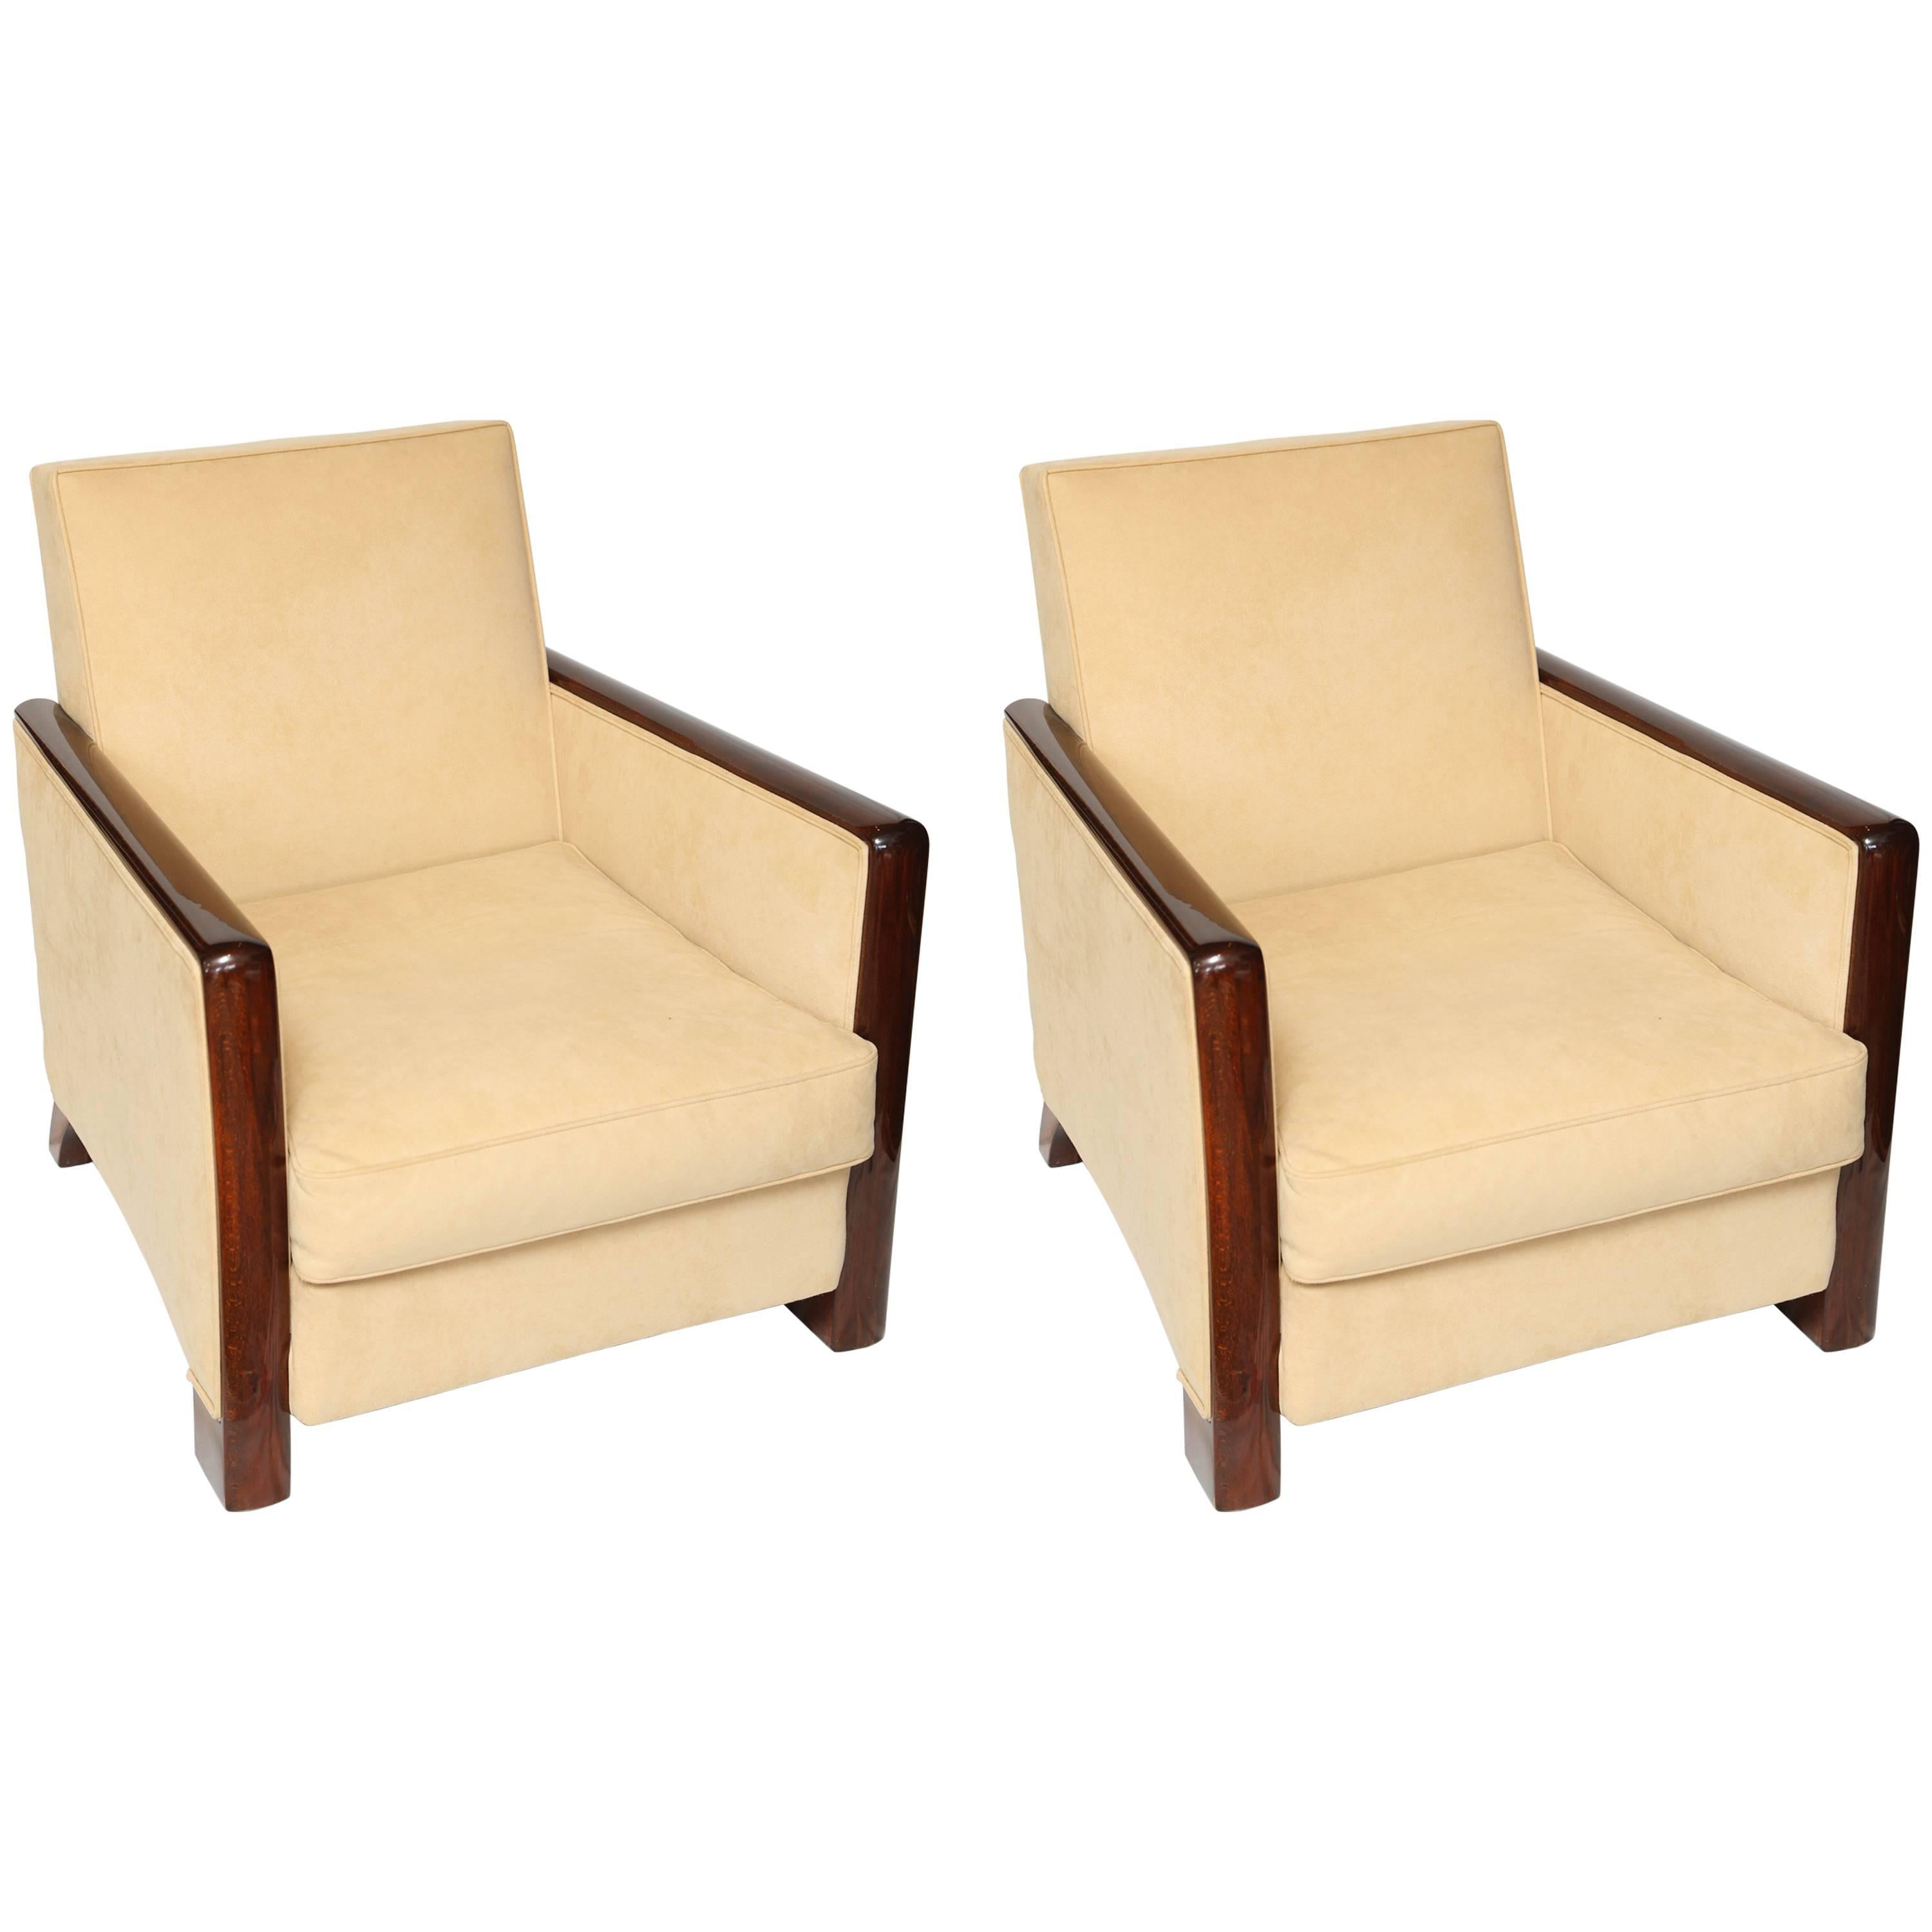 Beautiful Pair of French Art Deco Rosewood 1930s Armchairs